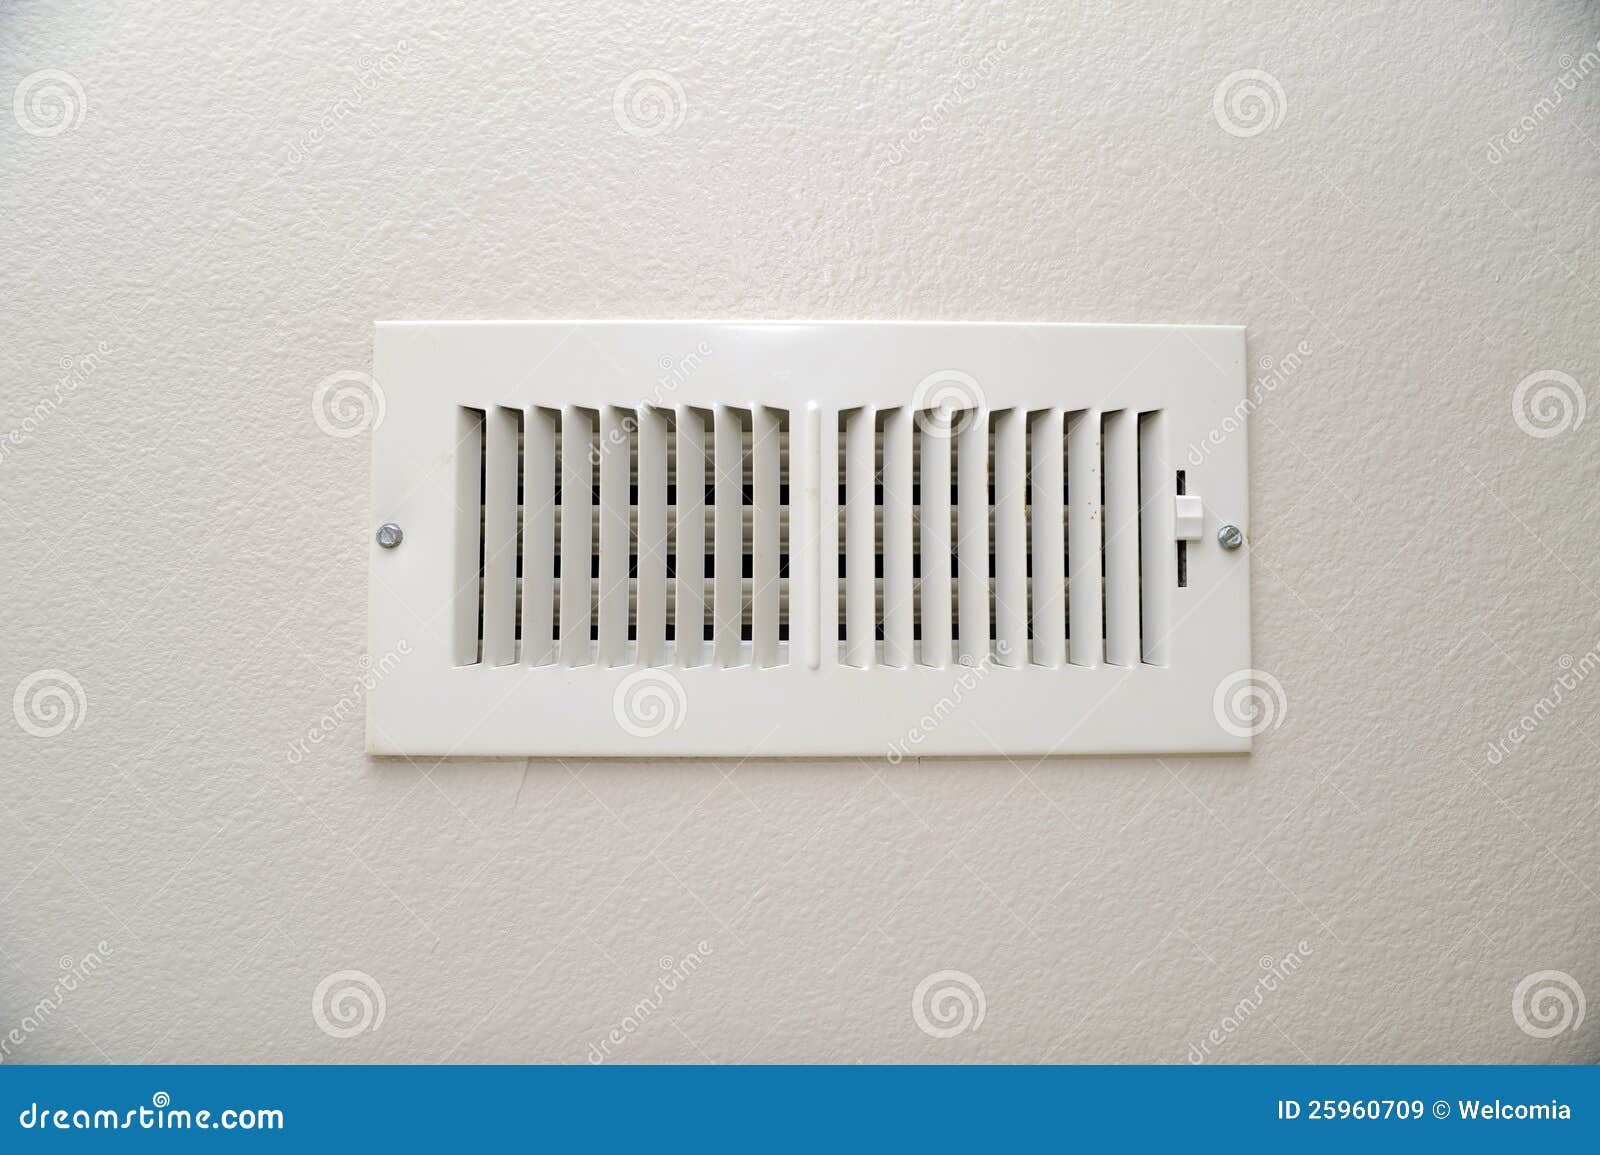 the vent